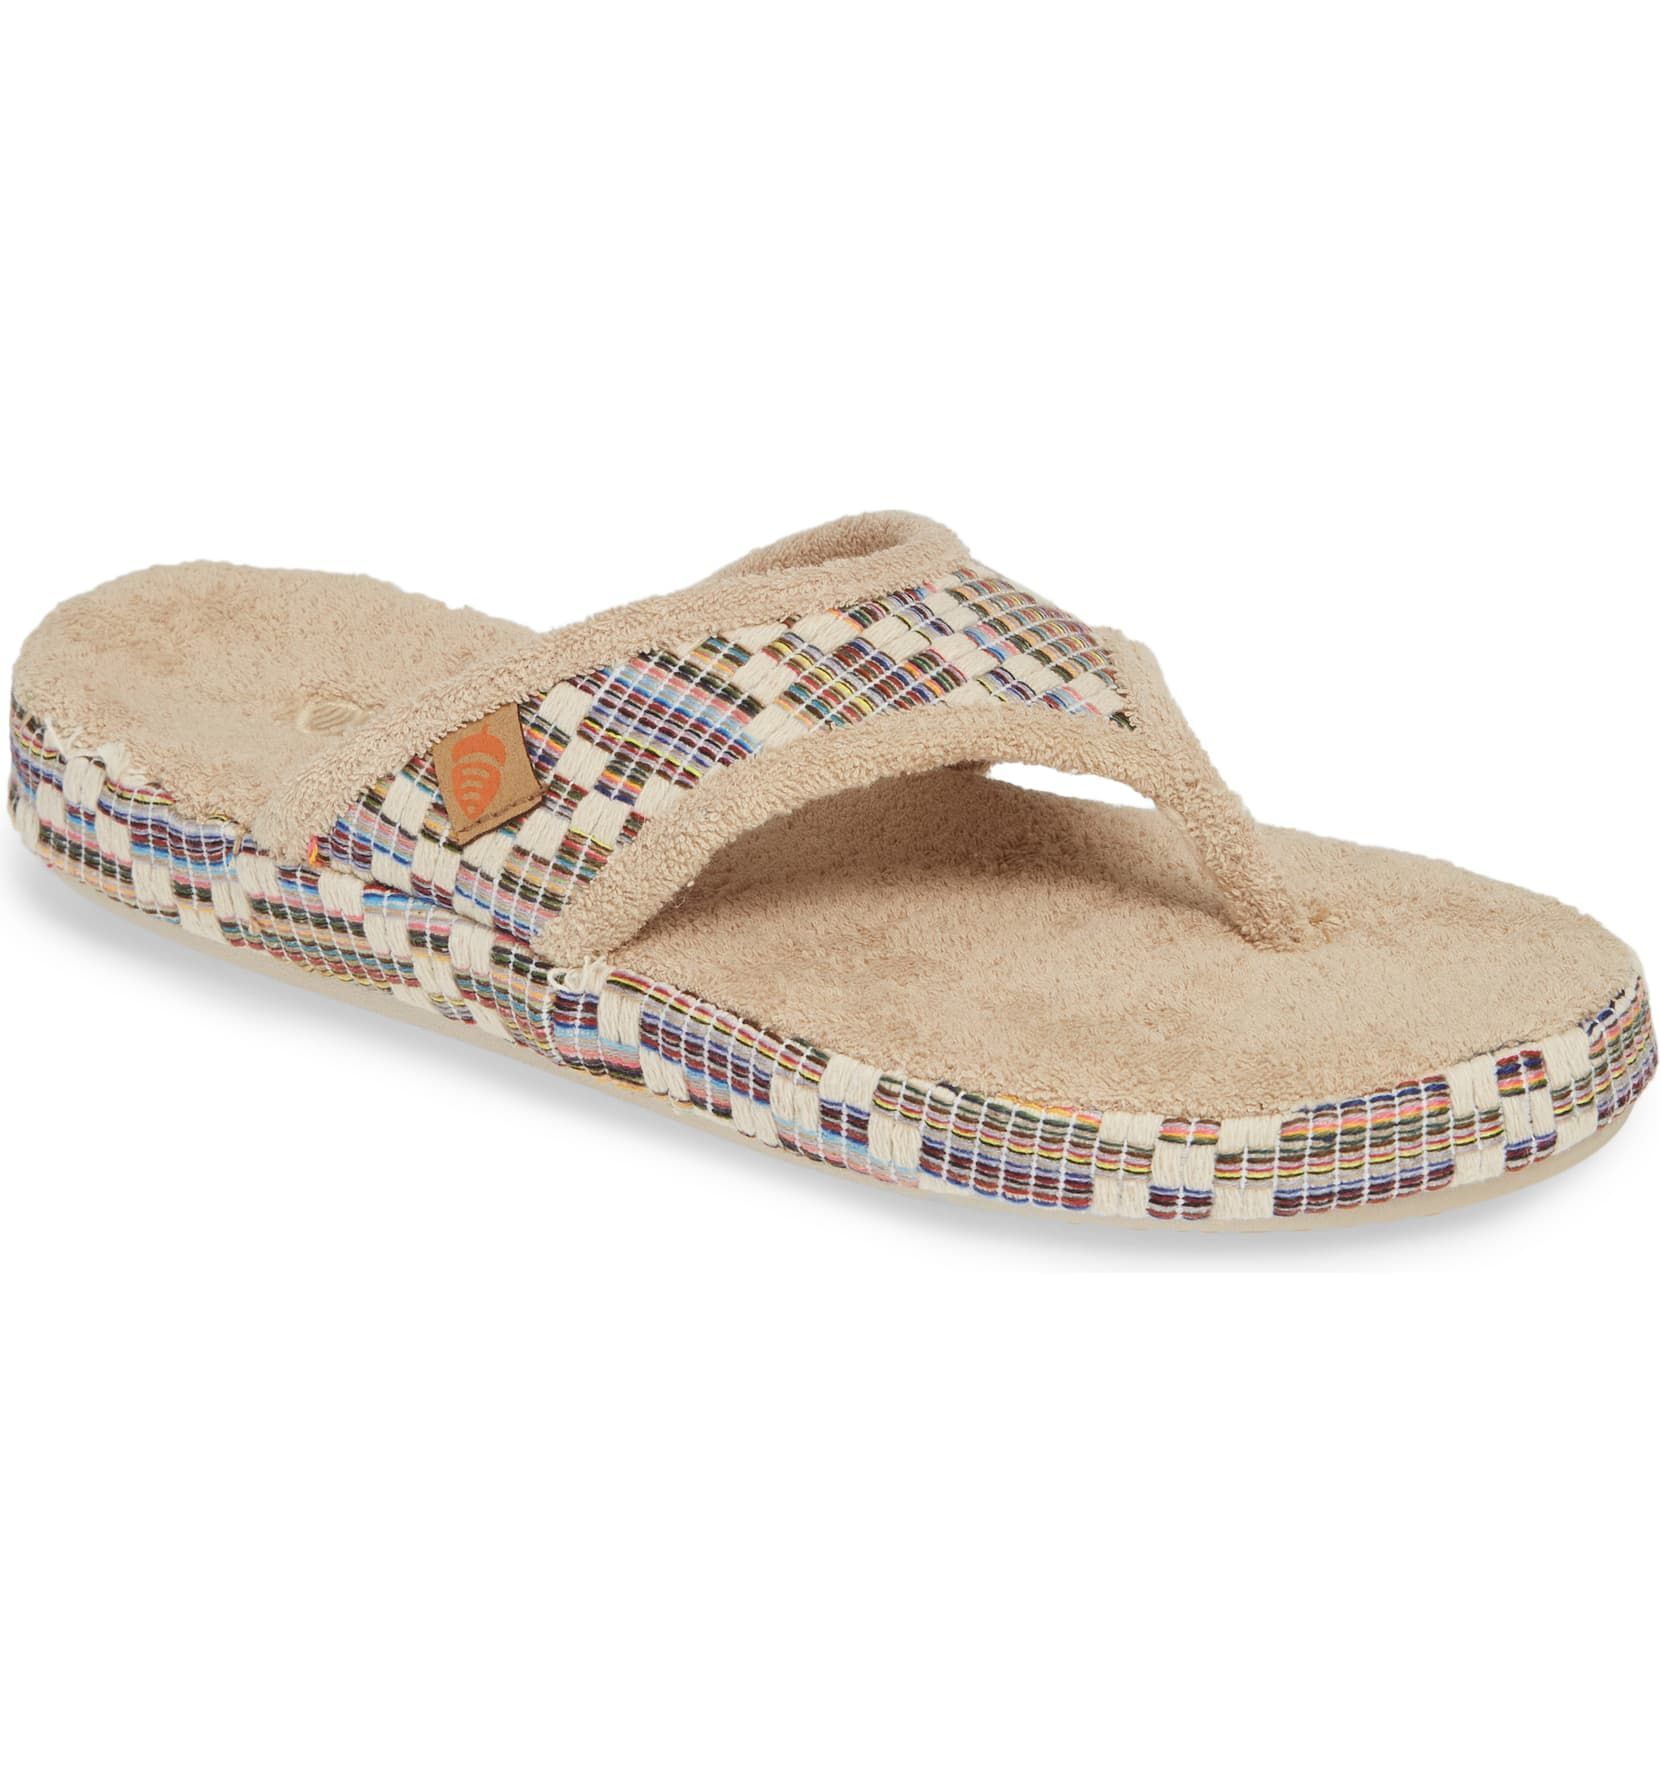 lands end slippers amazon